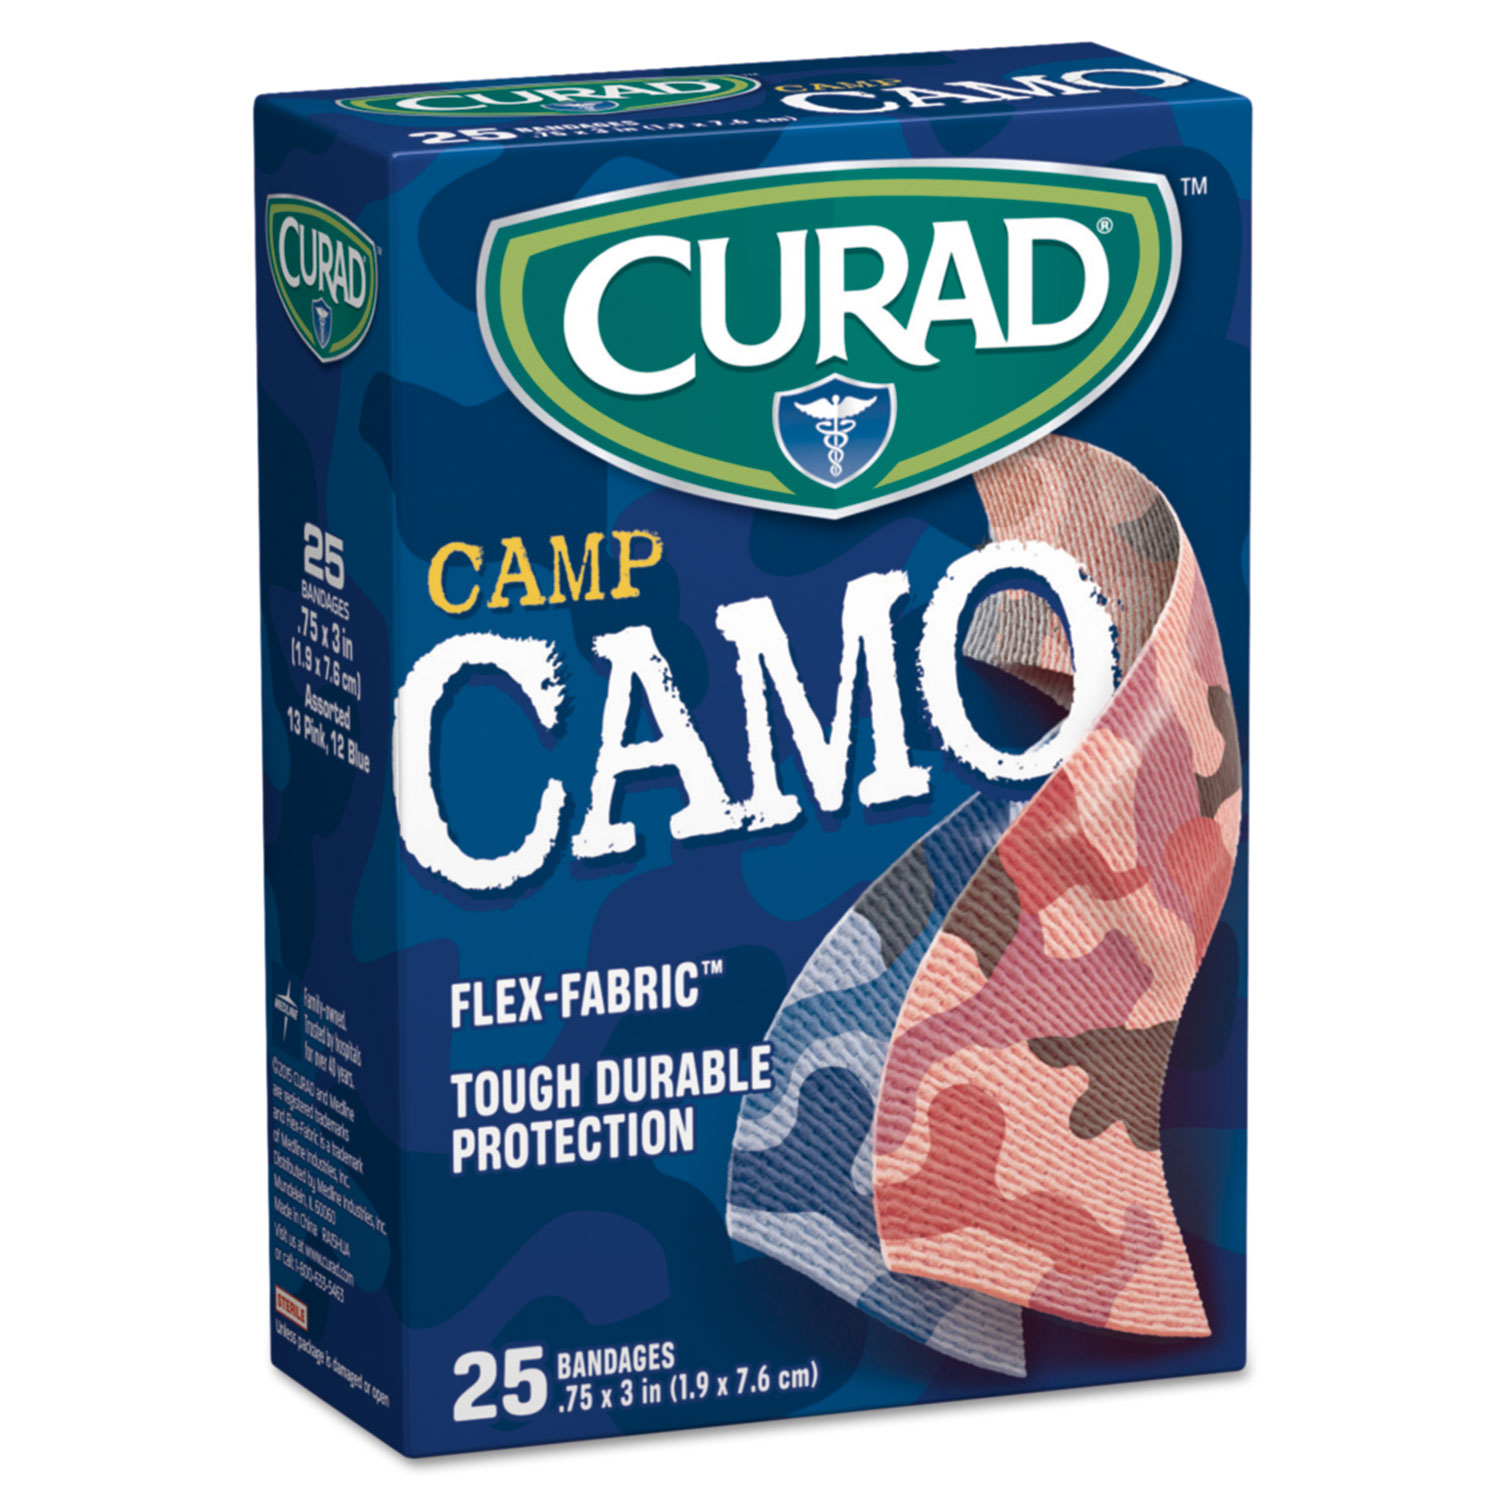  Curad CUR45702RB Kids Adhesive Bandages, Pink and Blue Camouflage, 3/4 x 3, 25/Box (MIICUR45702RB) 